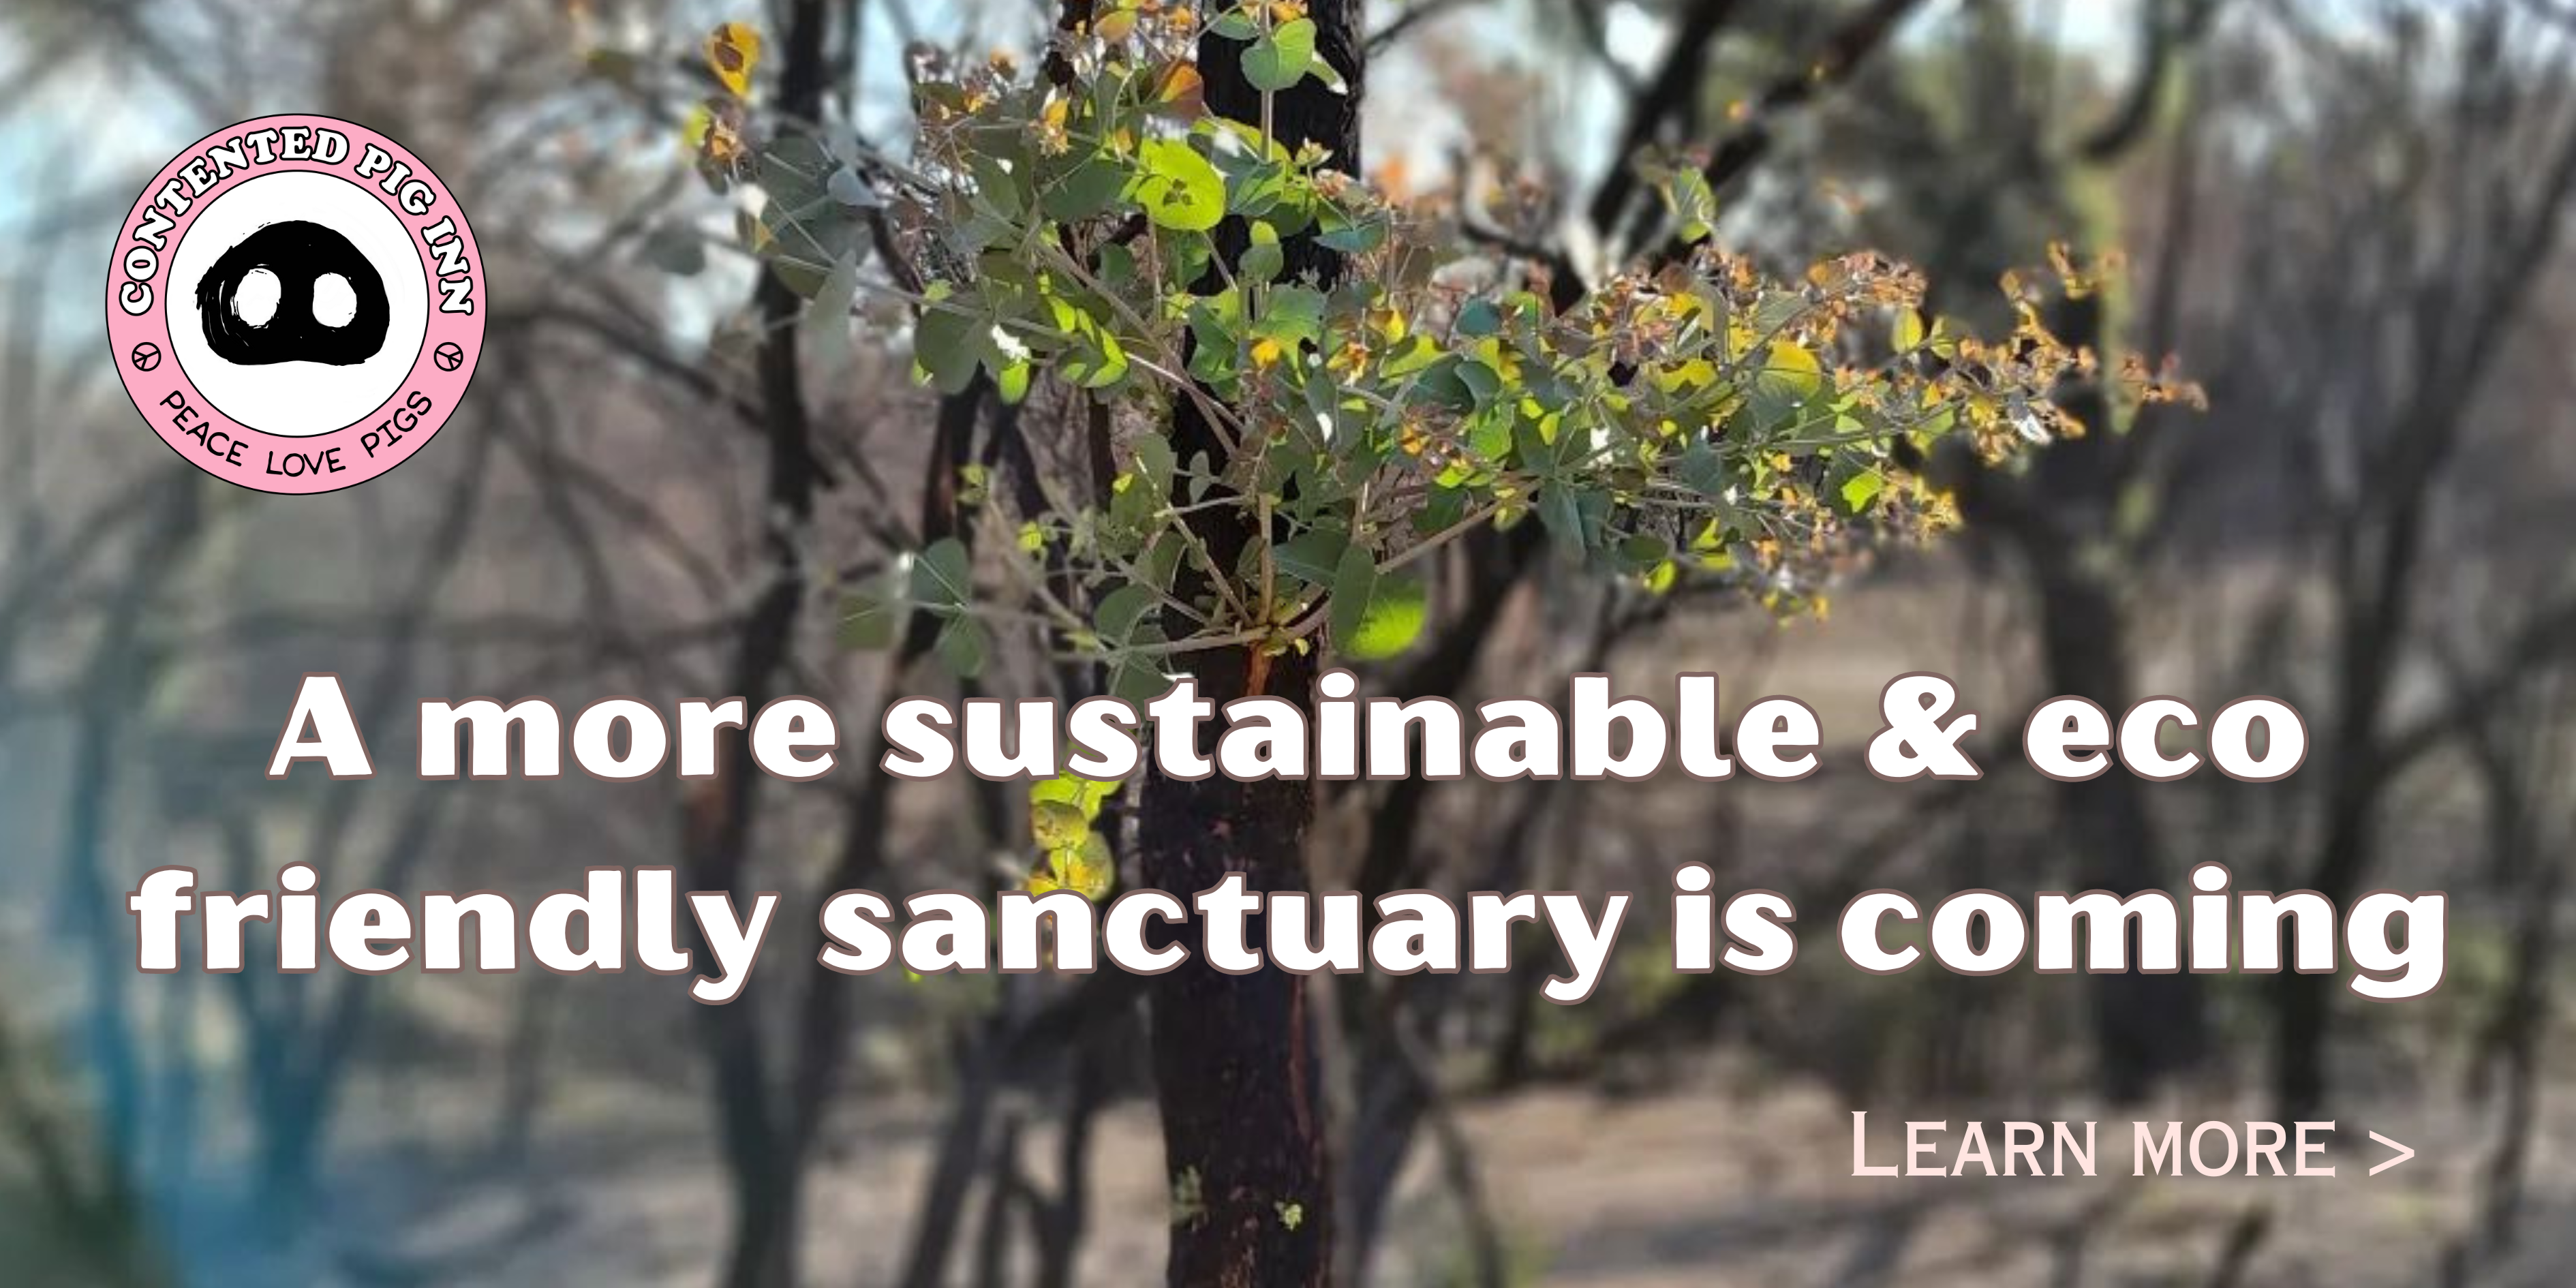 Saving lives through an eco-friendly sustainable rescue sanctuary!